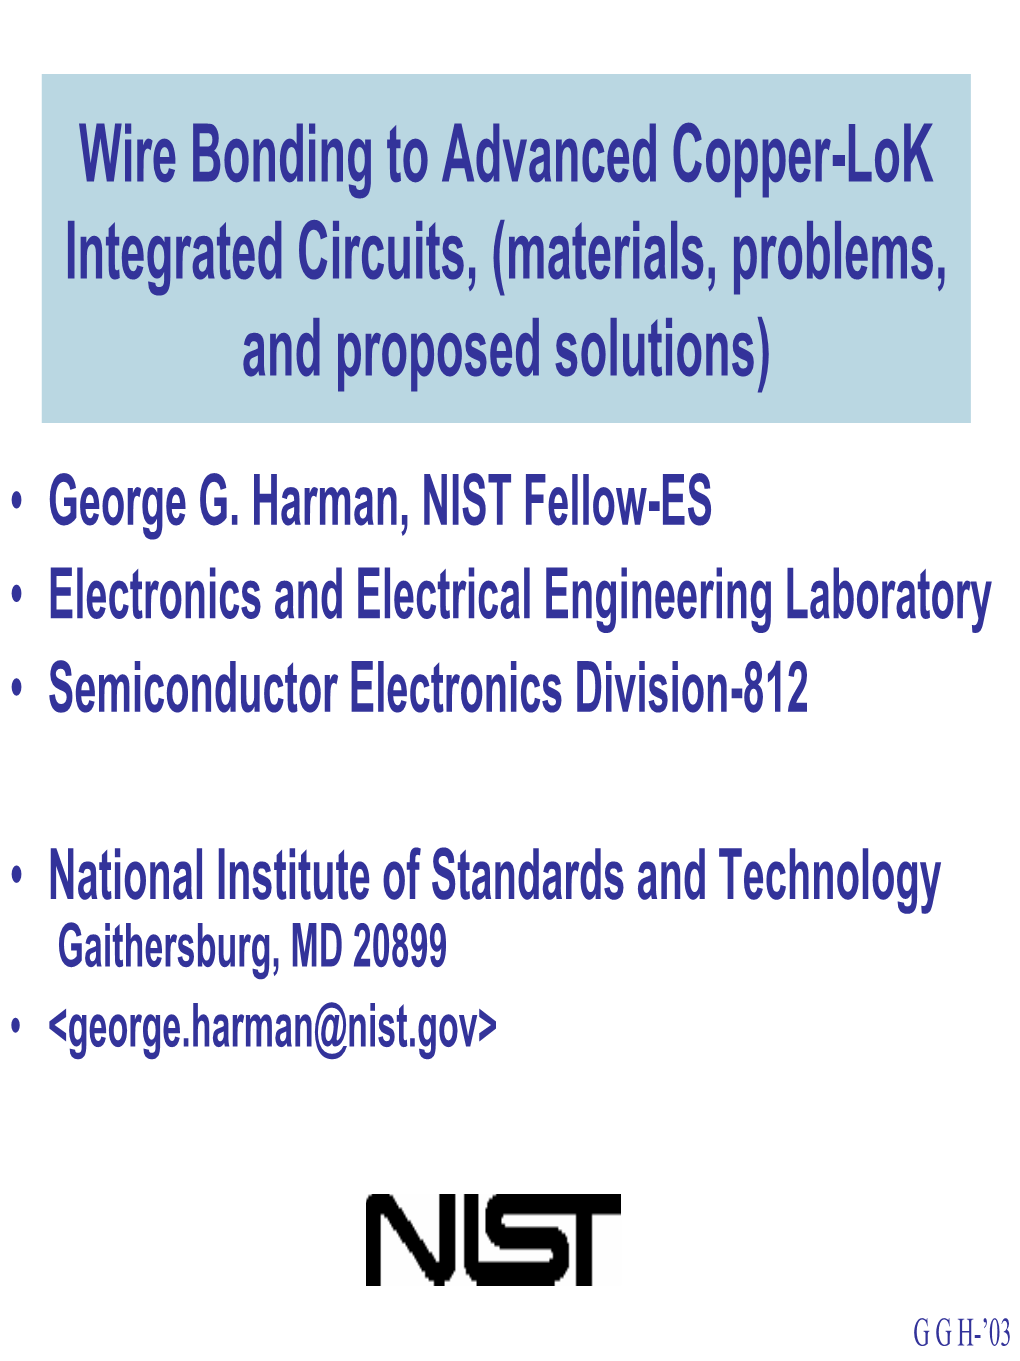 Wire Bonding to Advanced Copper-Lok Integrated Circuits, (Materials, Problems, and Proposed Solutions)